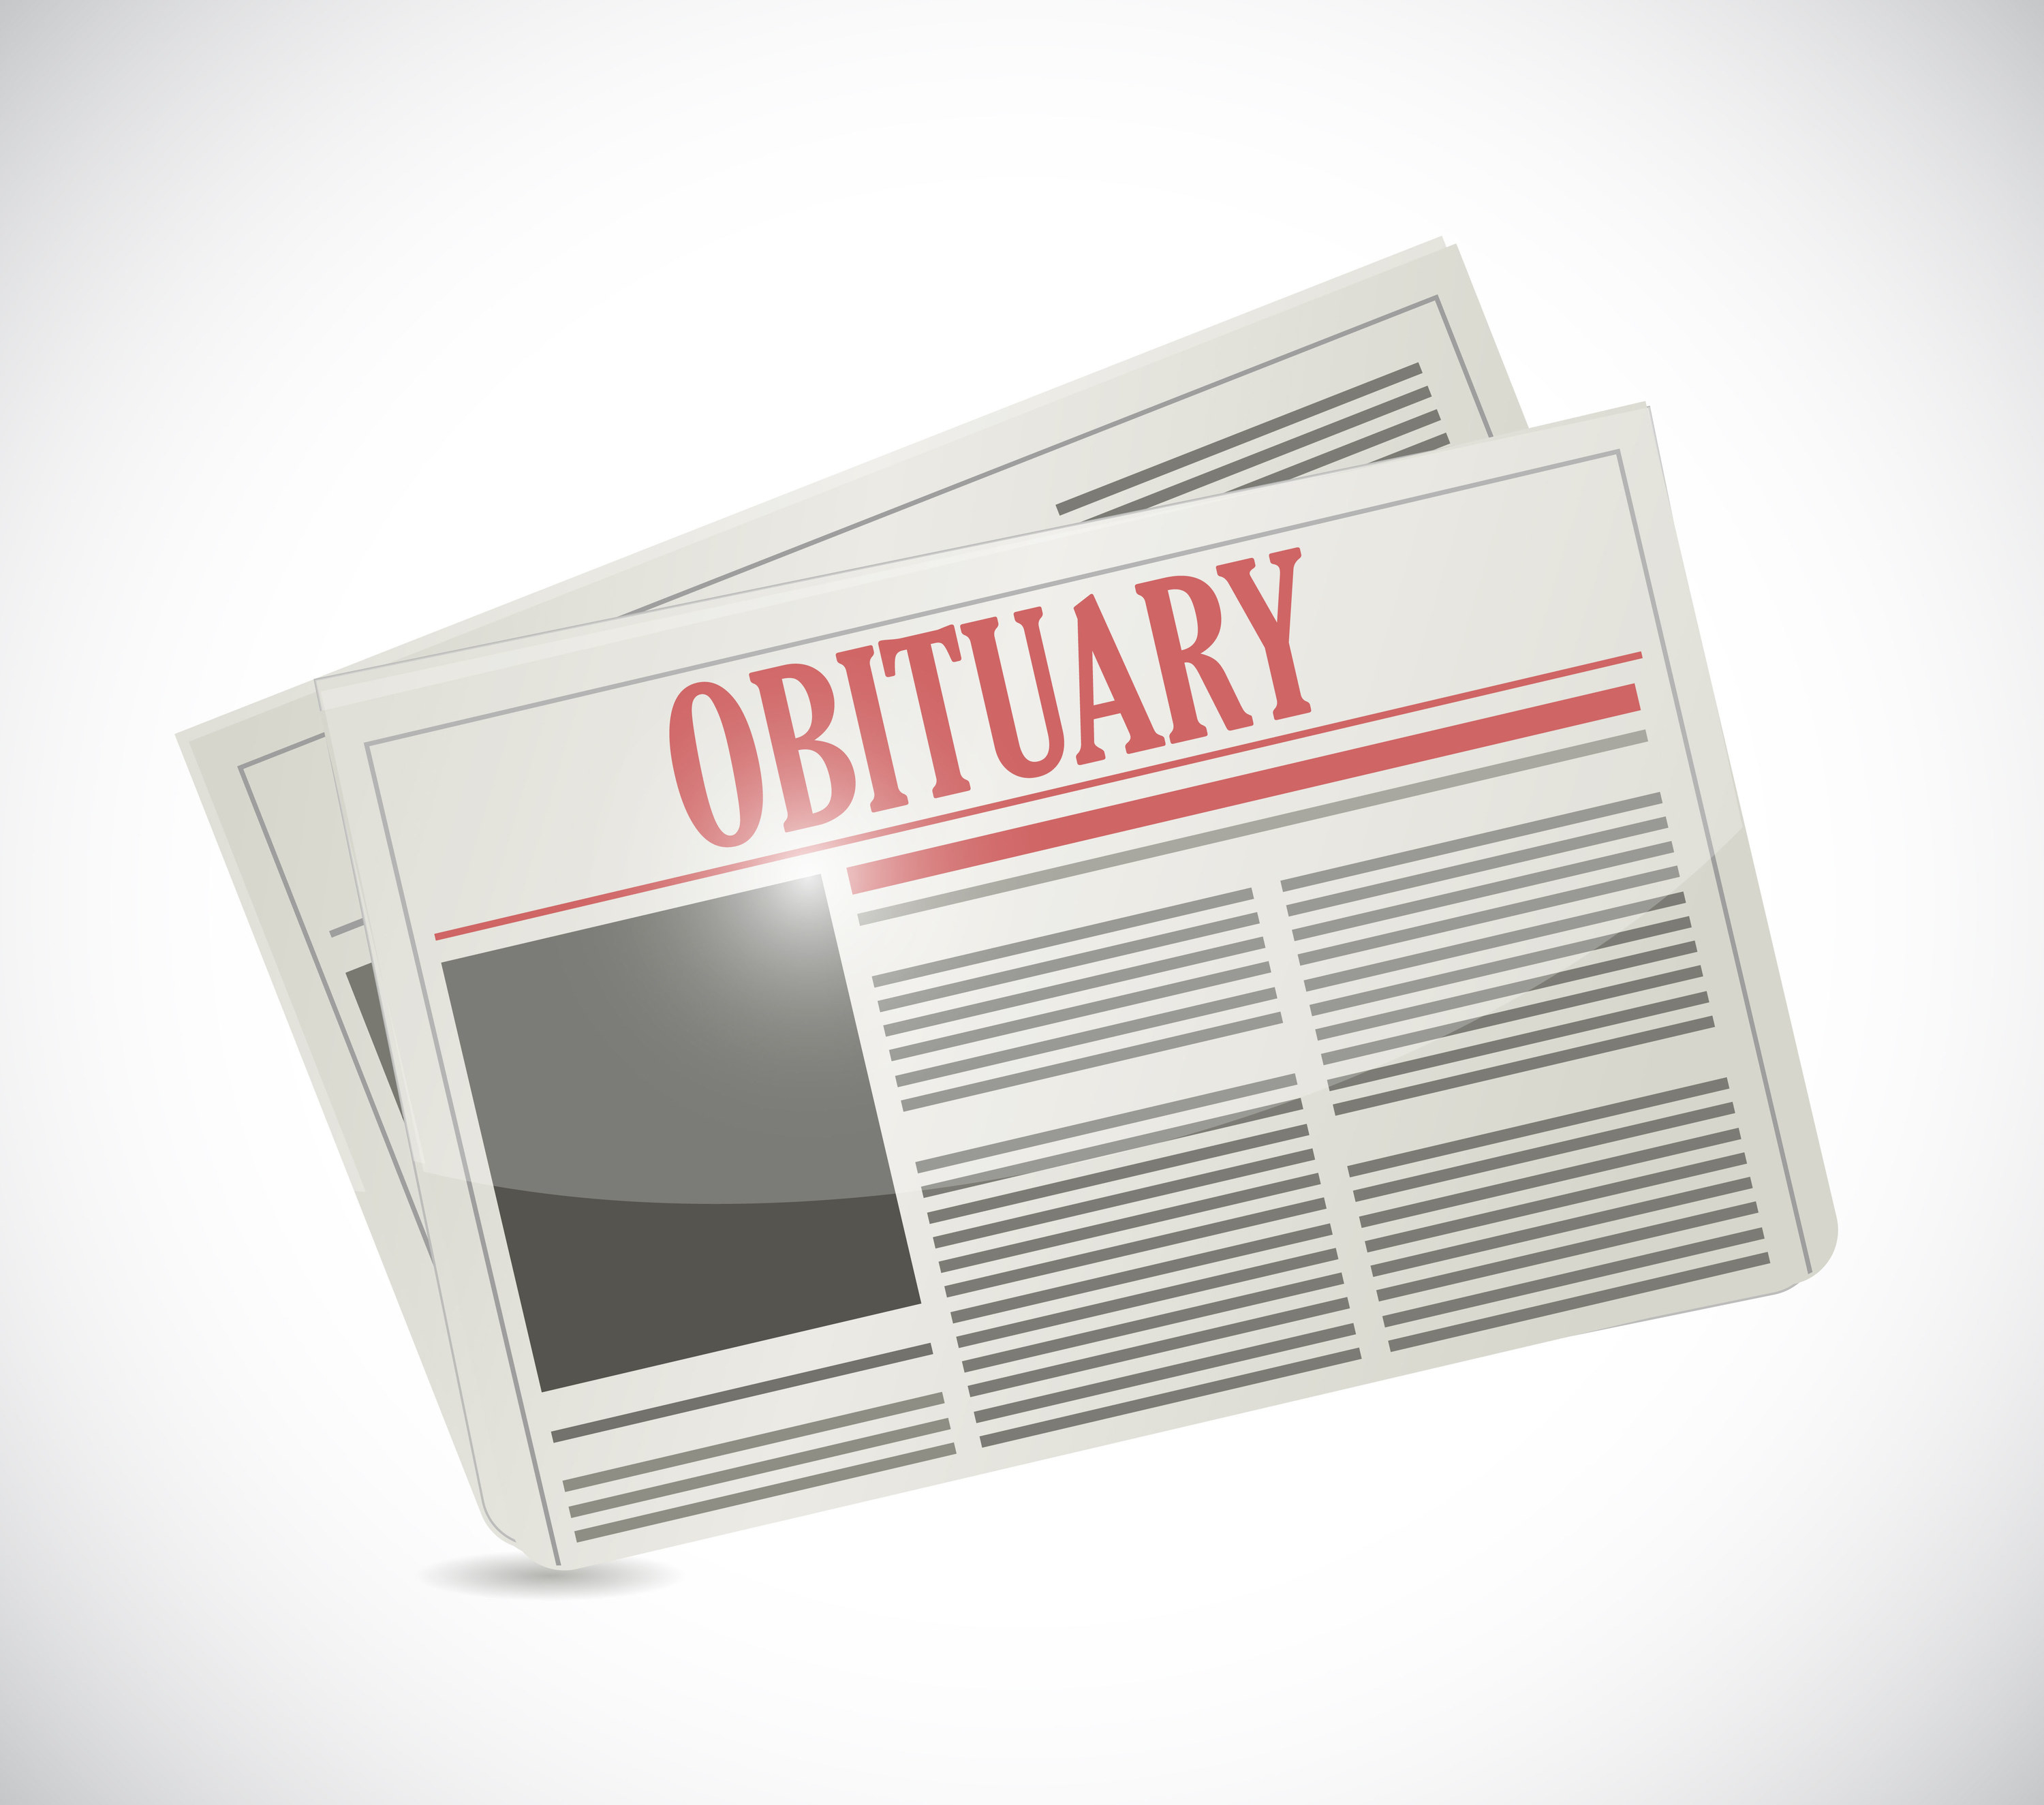 Obituary newspaper section illustration design over a white background